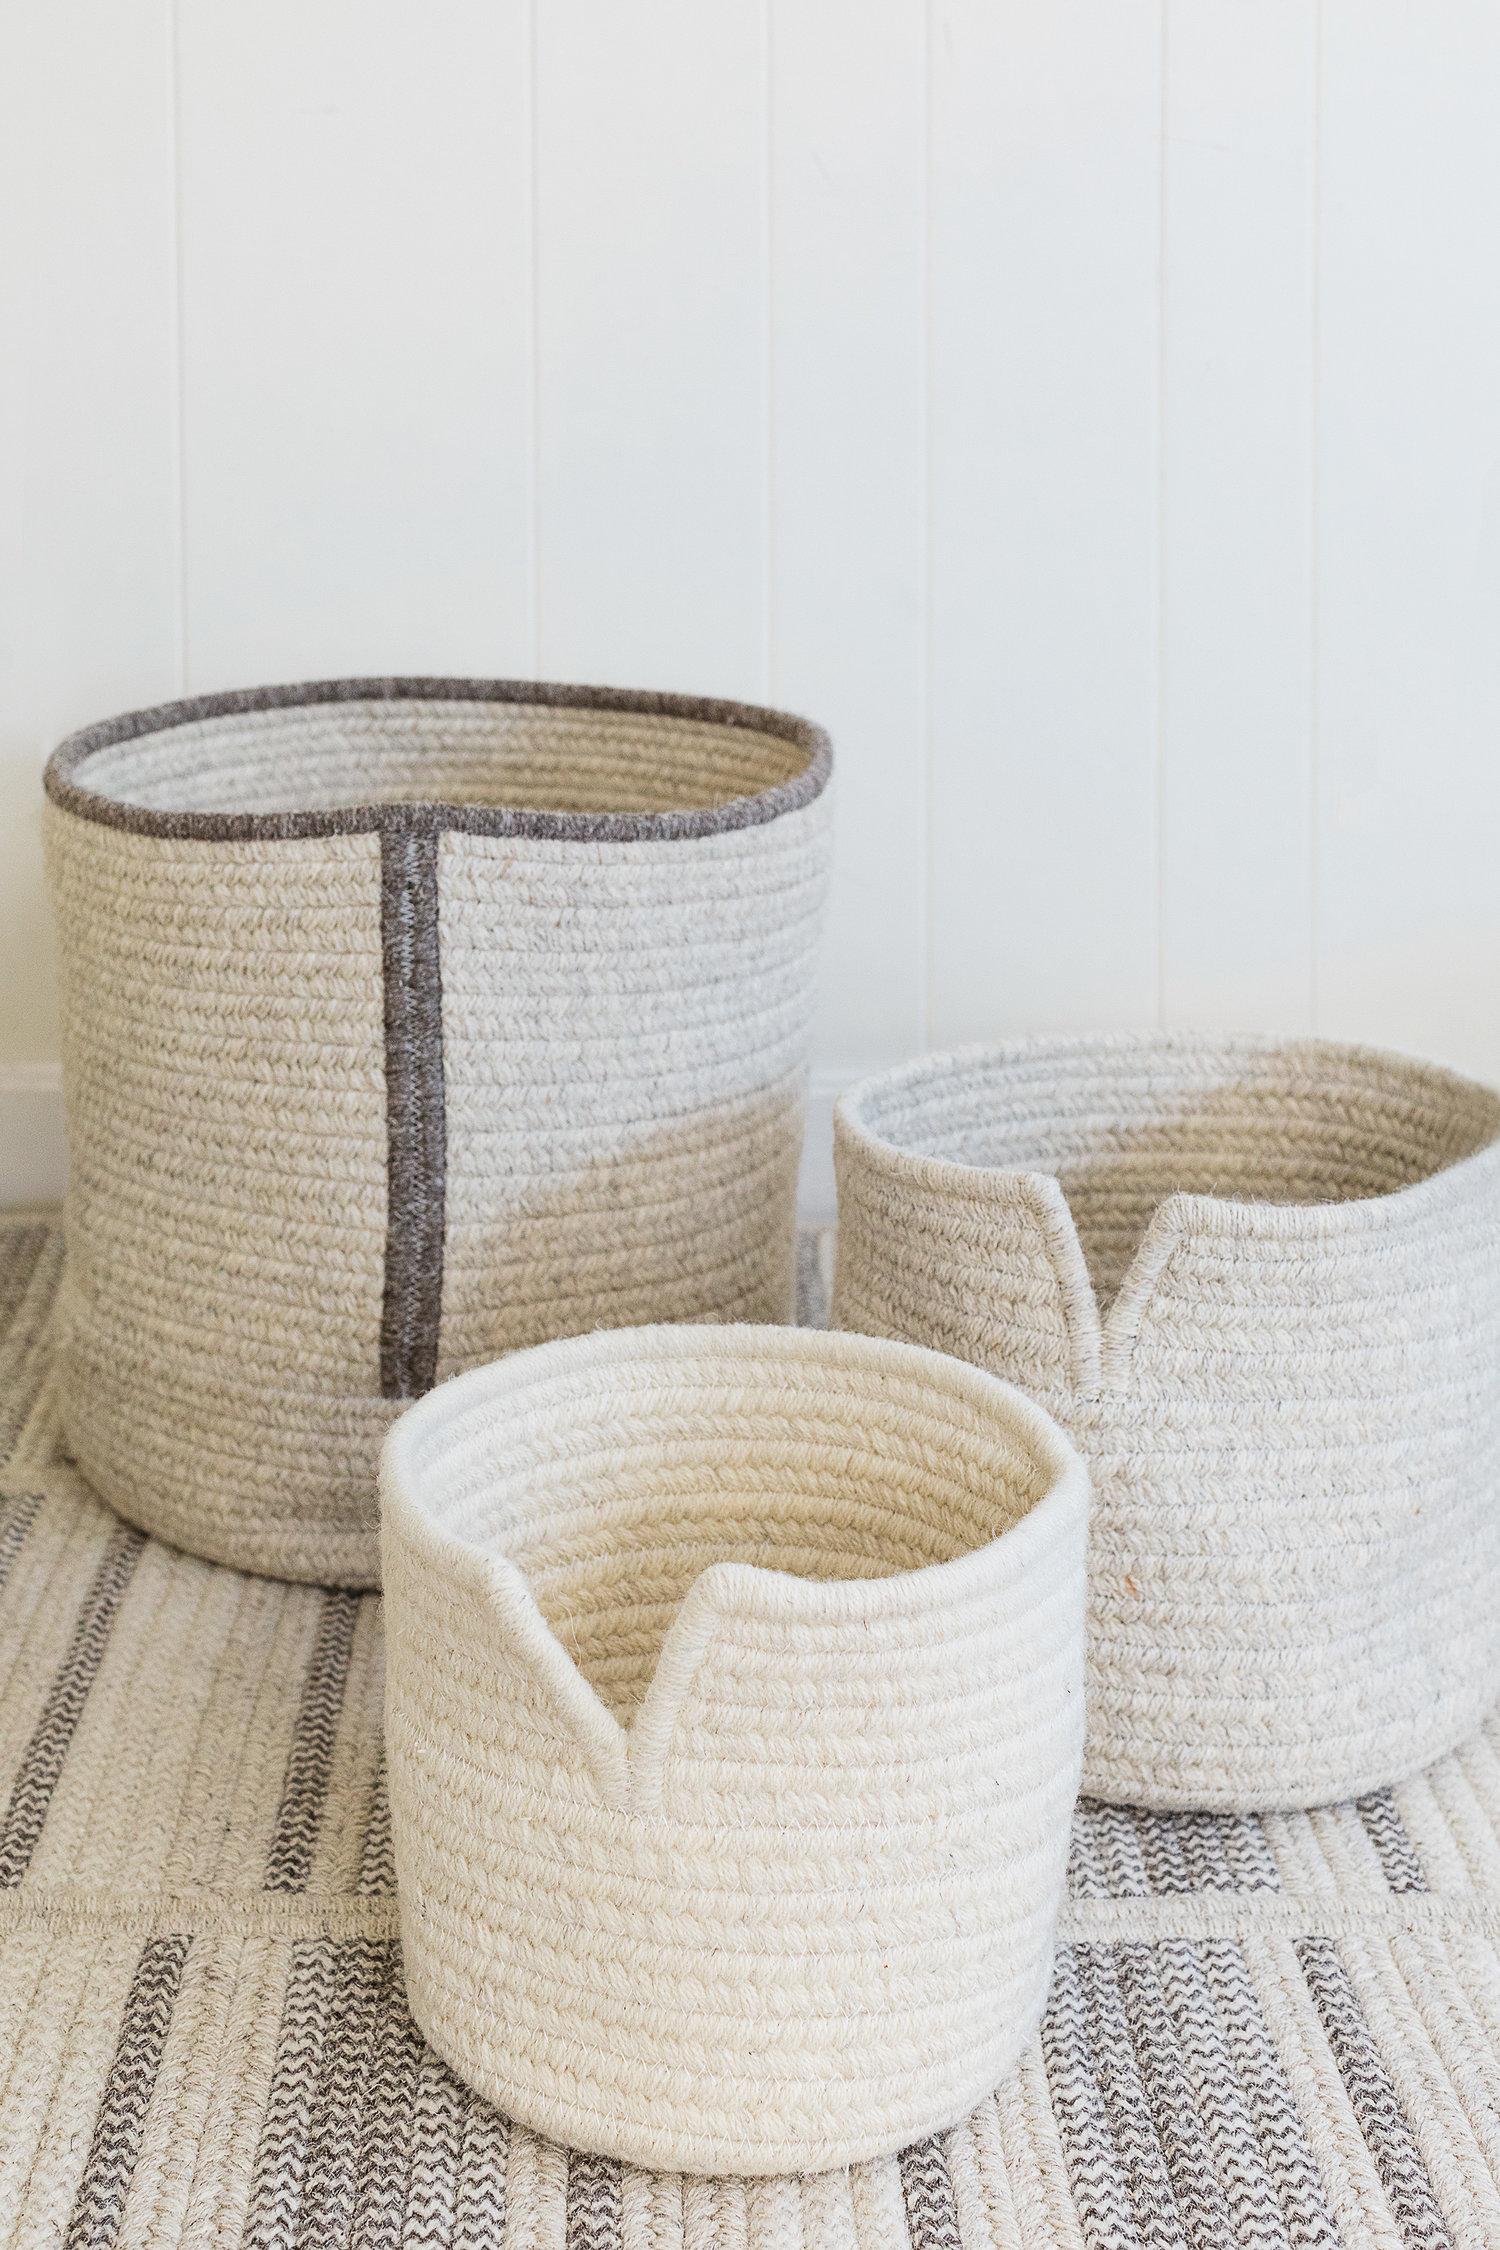 Created with a simple cut and finish binding, our Line Basket is made of flat woven braid. Light grey and dark grey natural un-dyed wool yarns are sewn with cotton thread.

Designed by Meredith Thayer in her South Boston studio and made to order